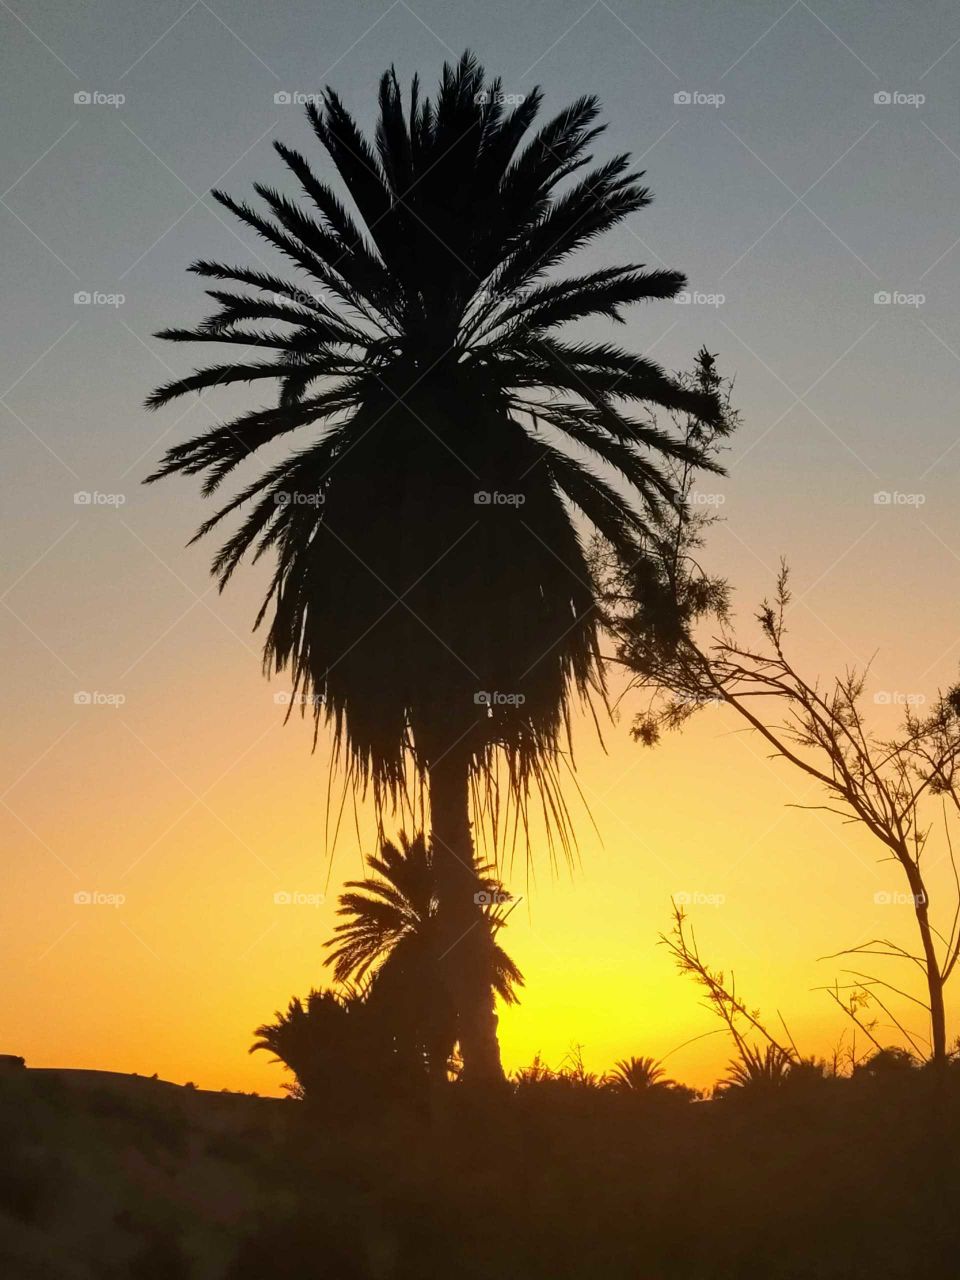 palm_trees in the time of sunset near Wargnoun river in the South of Tighmert village in the East South of Goulimine Morocco